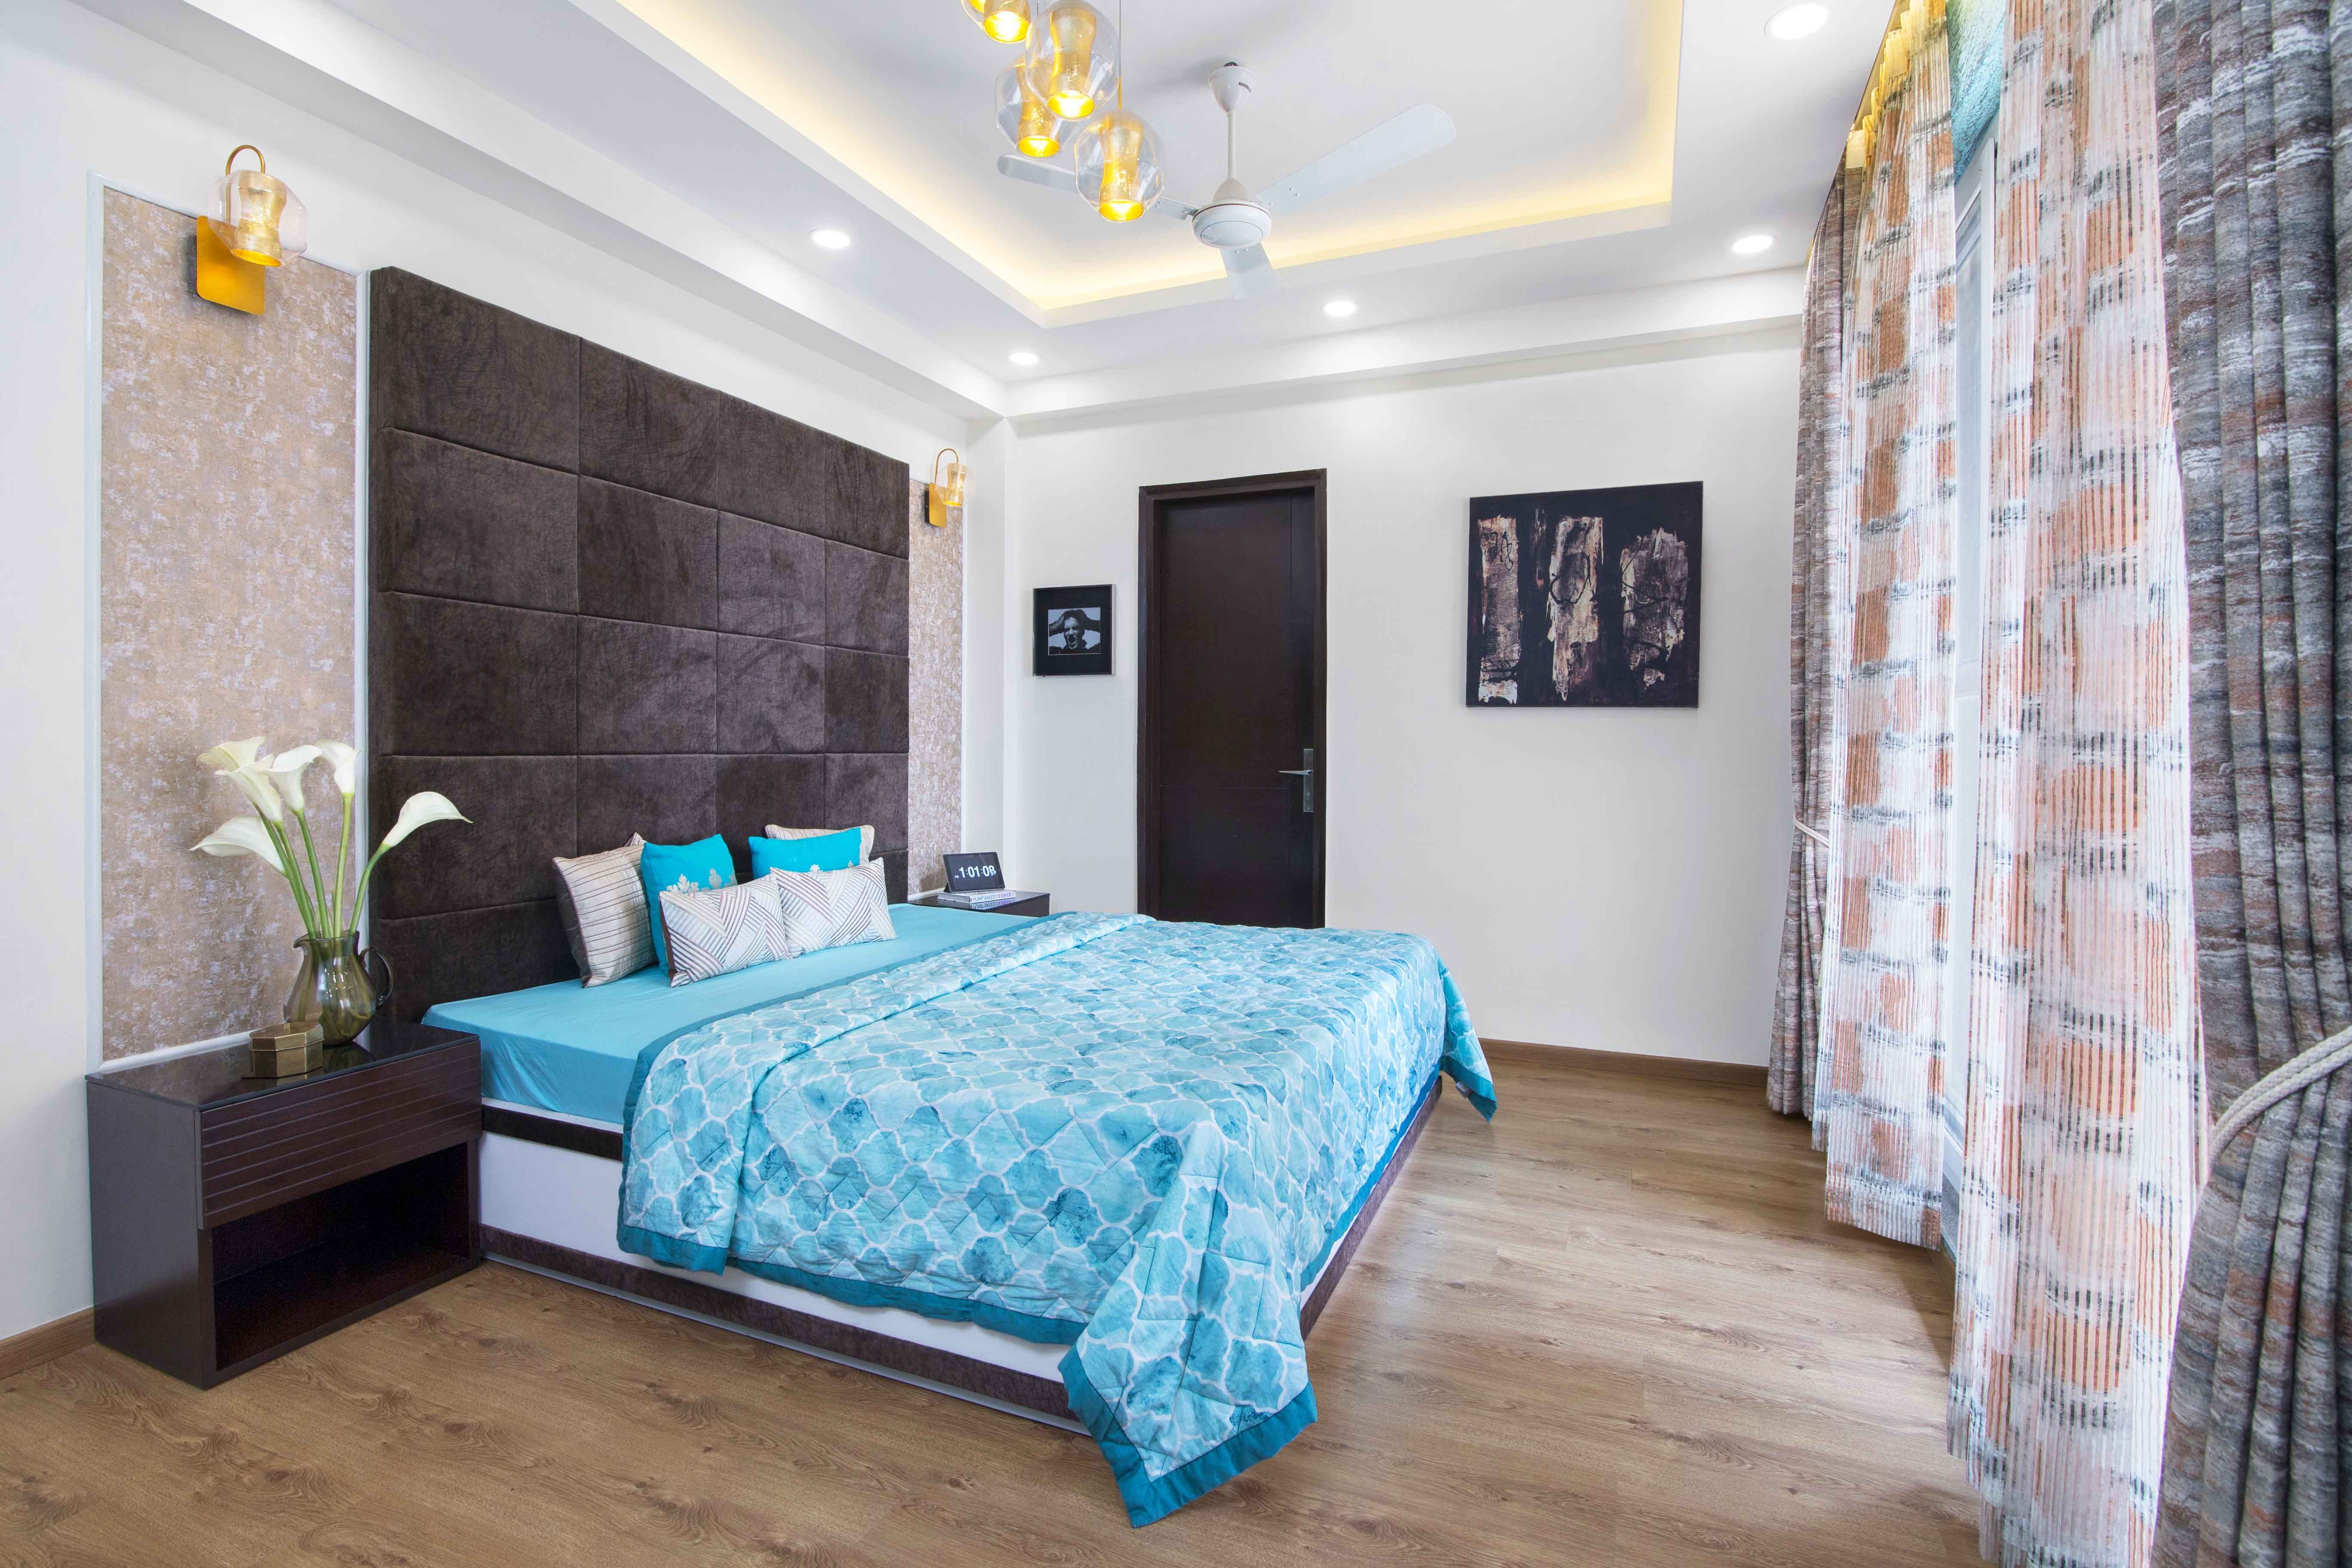 Modern Guest Room Design With Long Brown Headboard And Rectangular False Ceiling